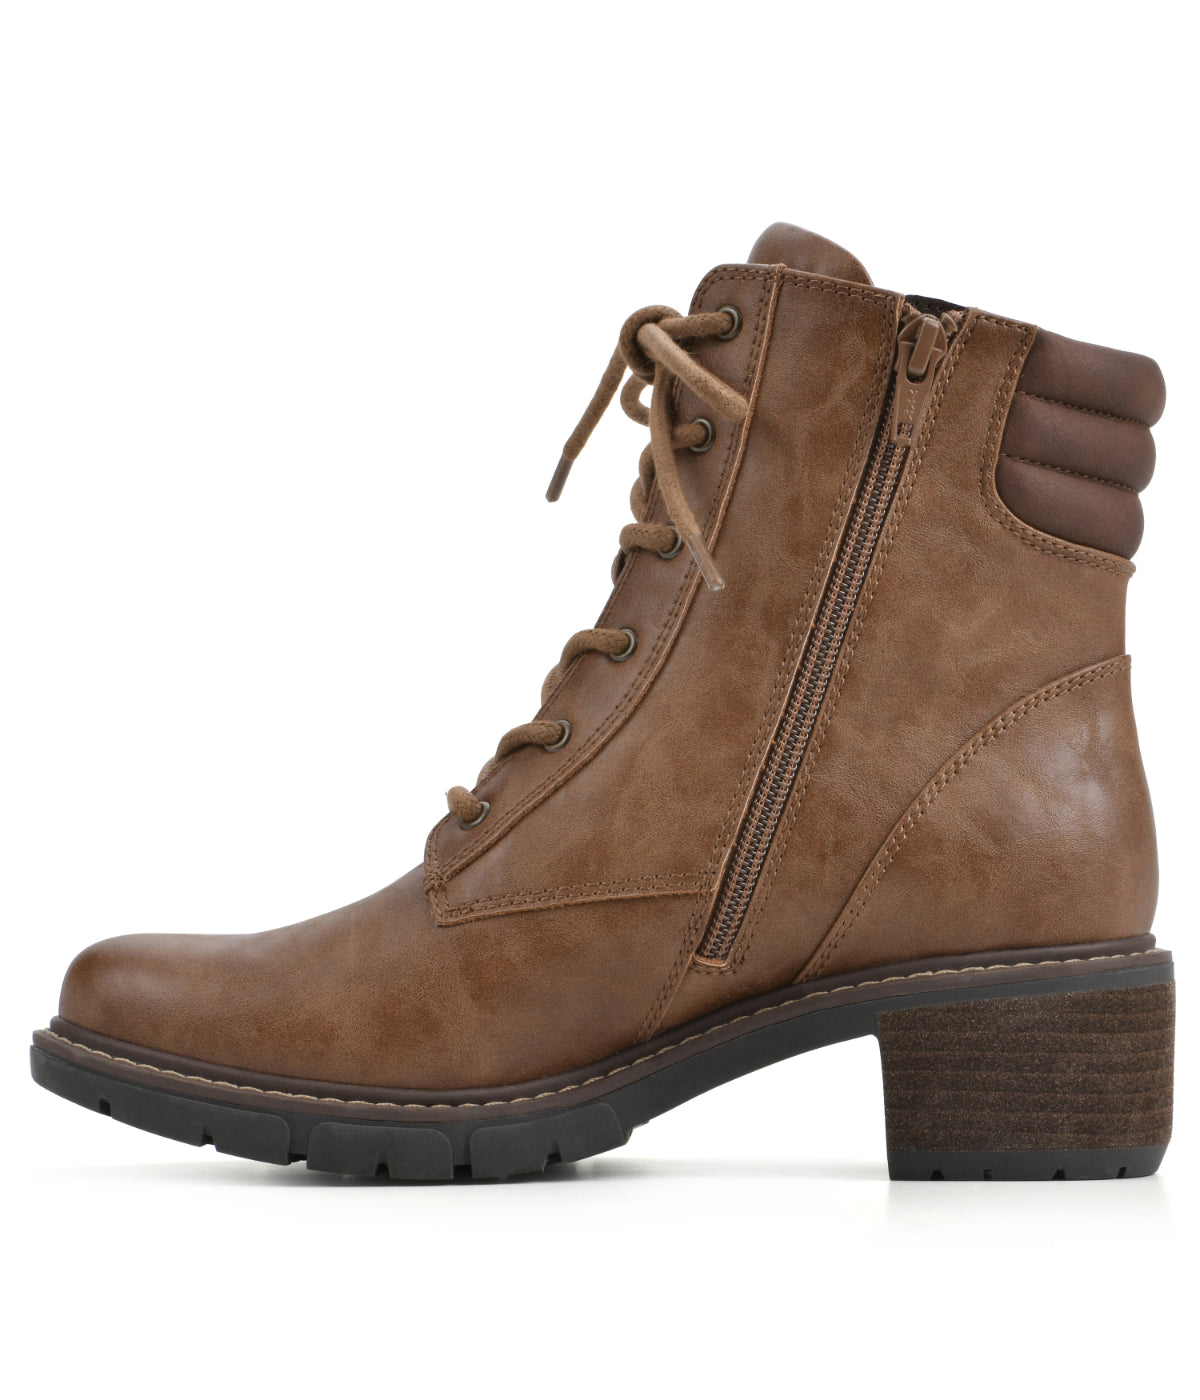 Crazies Lace-up Boots Chestnut/Smooth